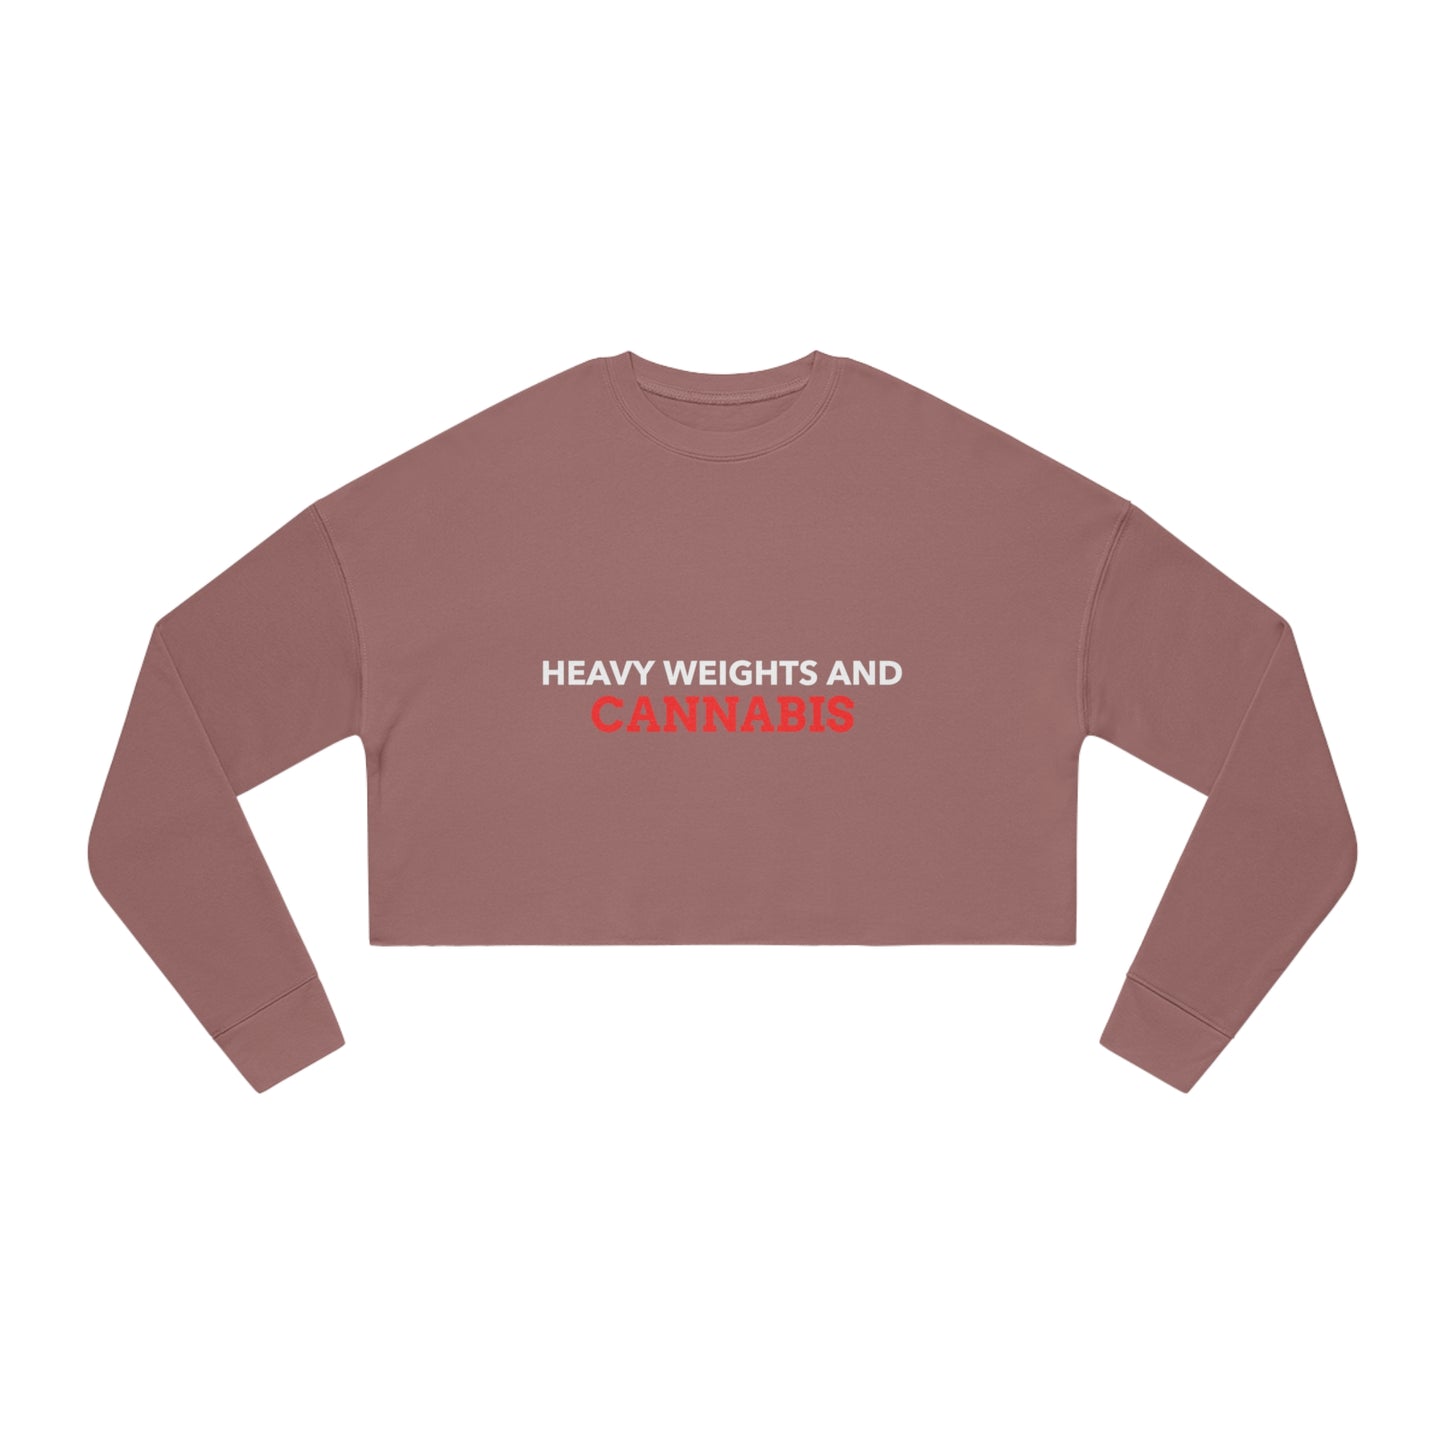 Women's Heavy Weights and Cannabis Cropped Sweatshirt